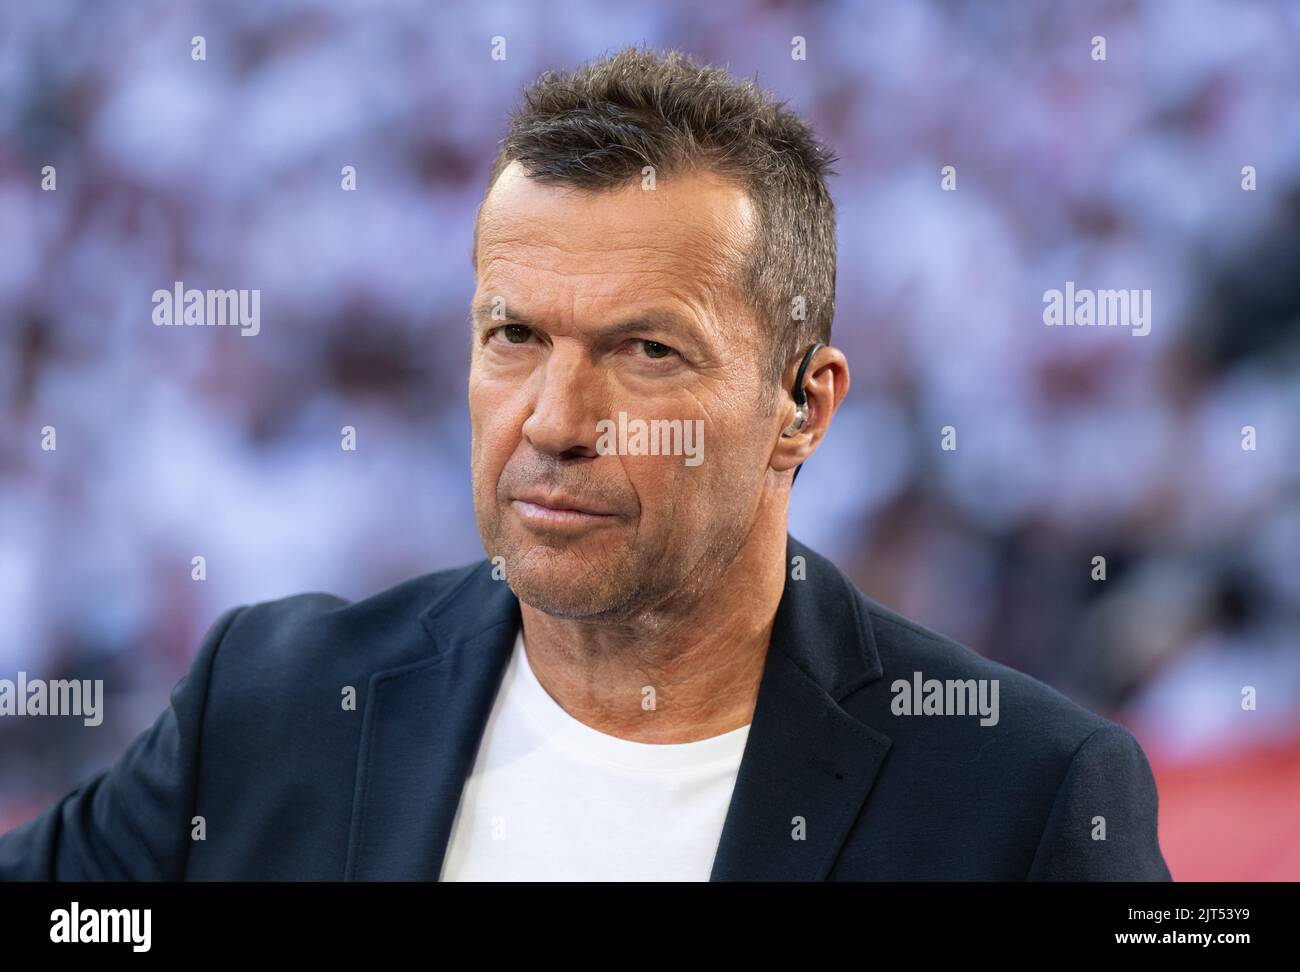 Munich, Germany. 27th Aug, 2022. Soccer: Bundesliga, Bayern Munich - Borussia Mönchengladbach, Matchday 4 at the Allianz Arena. Lothar Matthäus, TV expert, comes to the stadium before the match. Credit: Sven Hoppe/dpa - IMPORTANT NOTE: In accordance with the requirements of the DFL Deutsche Fußball Liga and the DFB Deutscher Fußball-Bund, it is prohibited to use or have used photographs taken in the stadium and/or of the match in the form of sequence pictures and/or video-like photo series./dpa/Alamy Live News Stock Photo